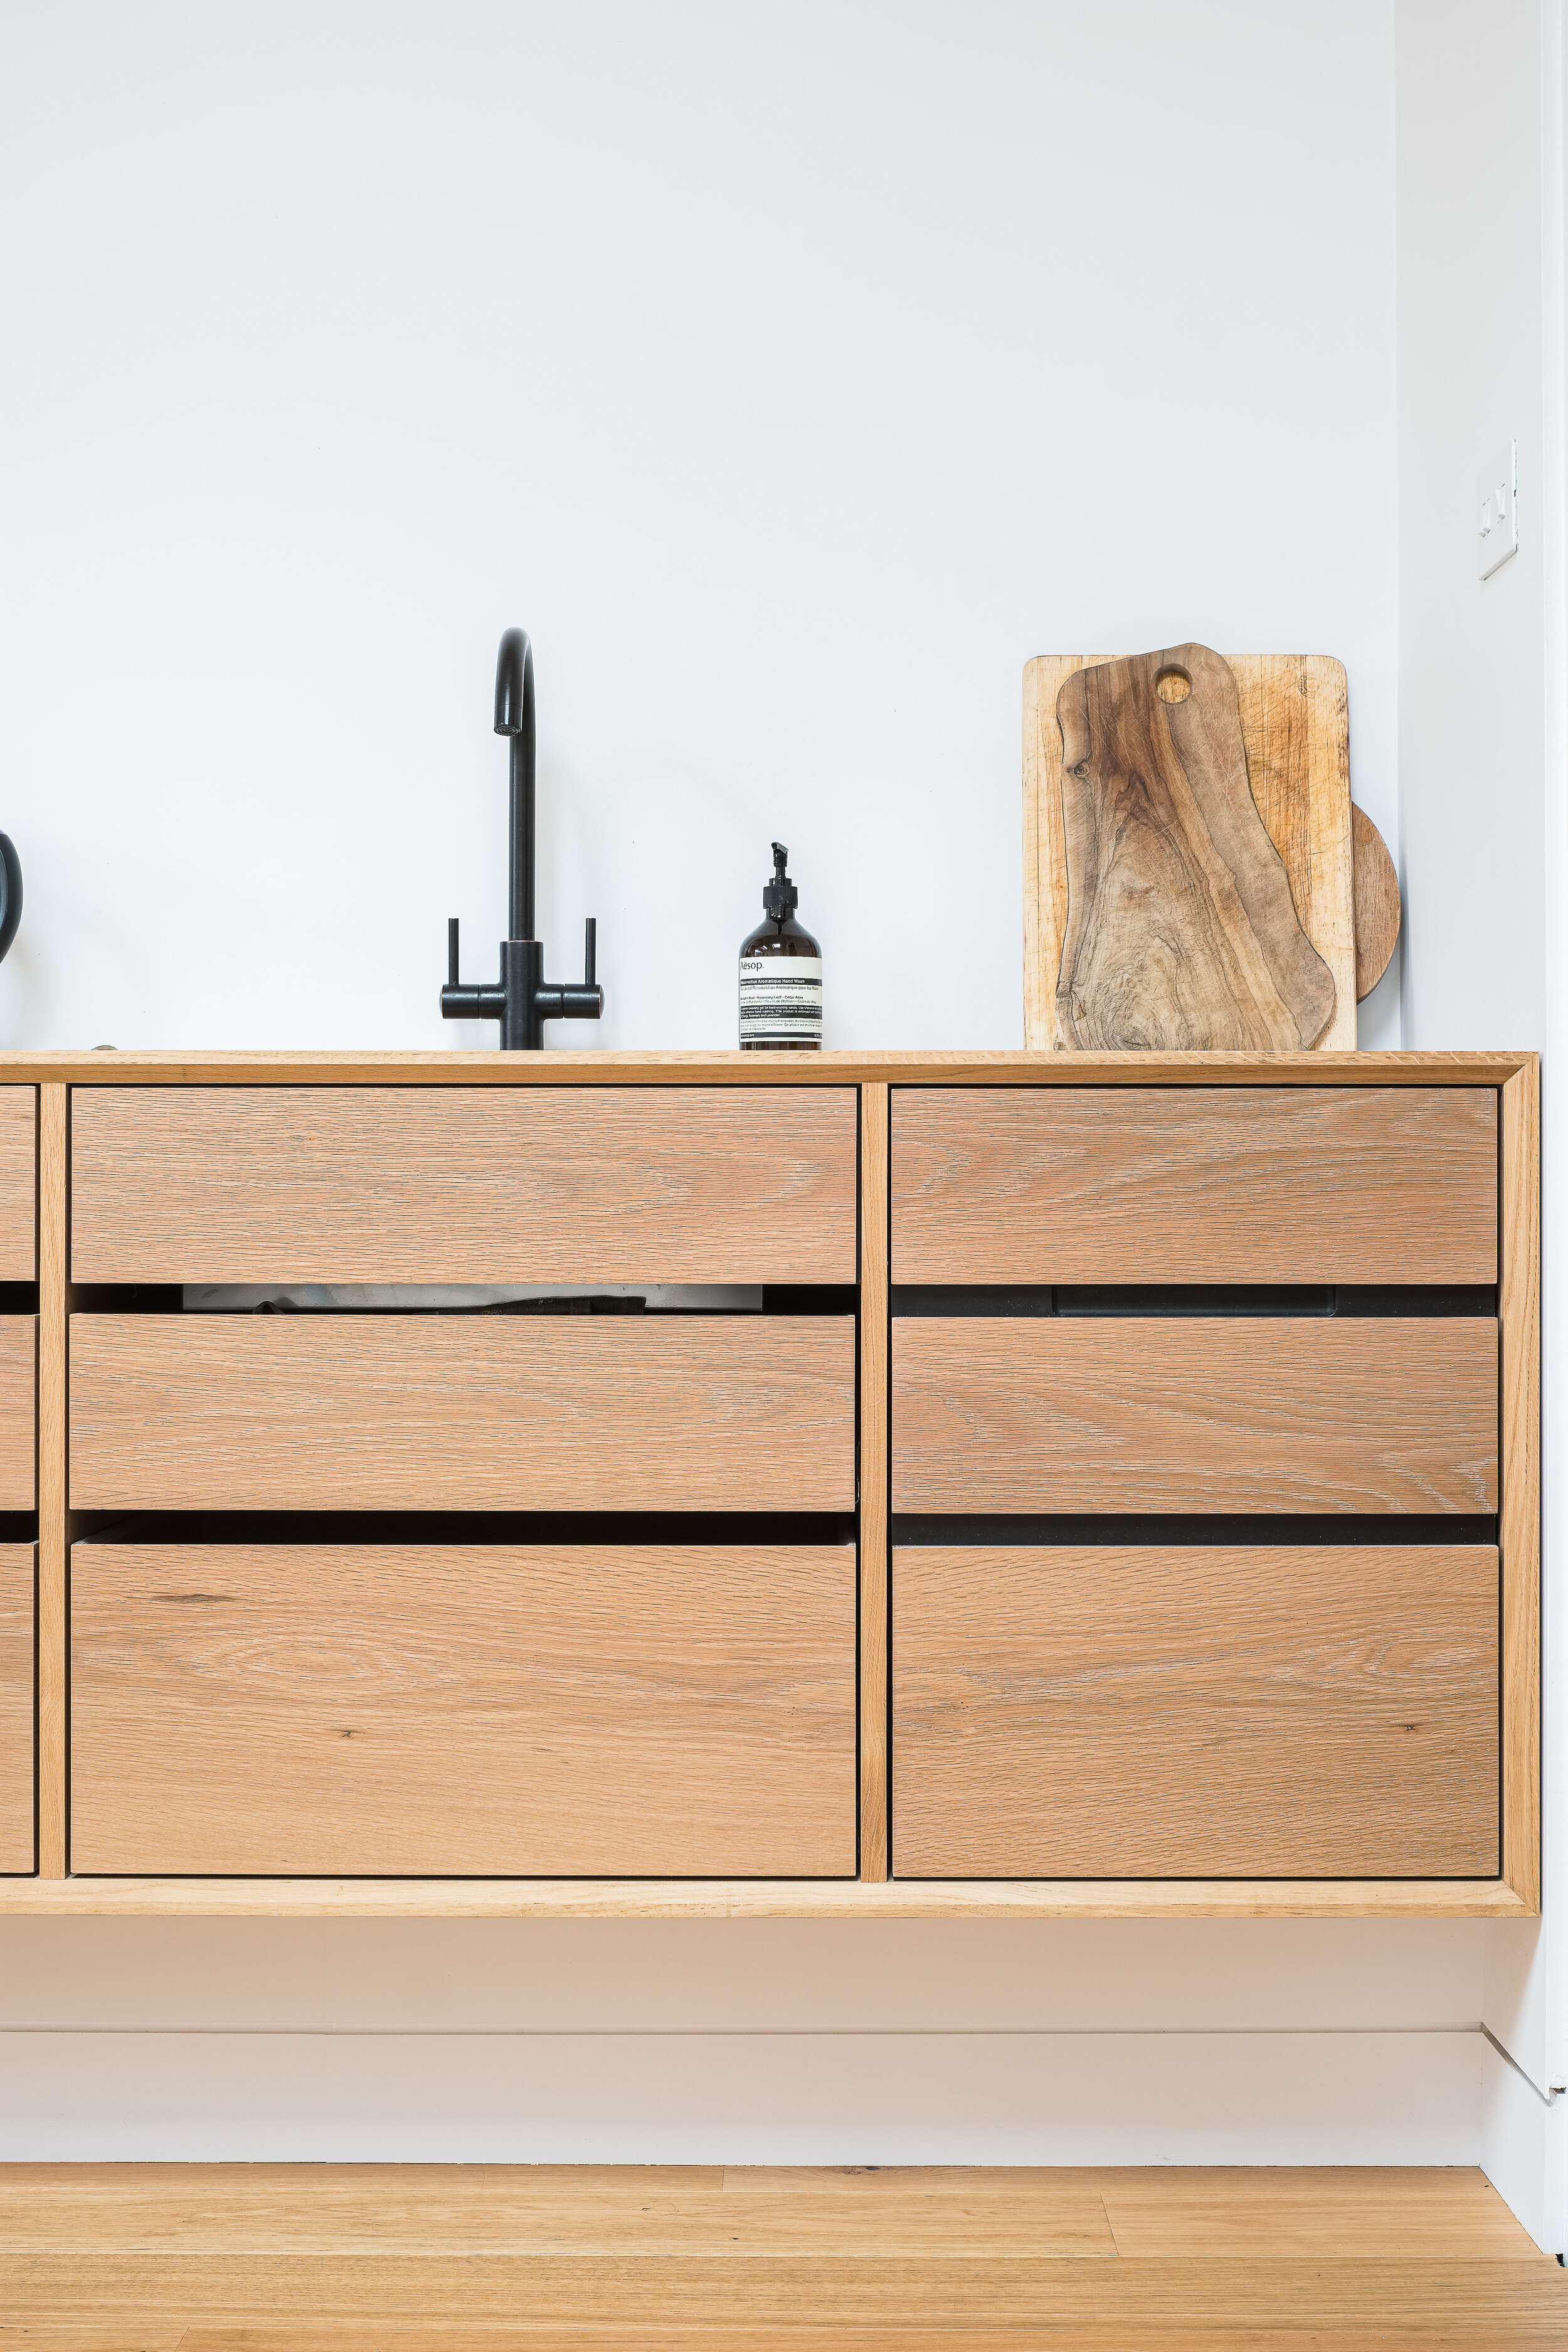 Fred+Howarth+Photography_Cabinet+Makers+House_02.jpg